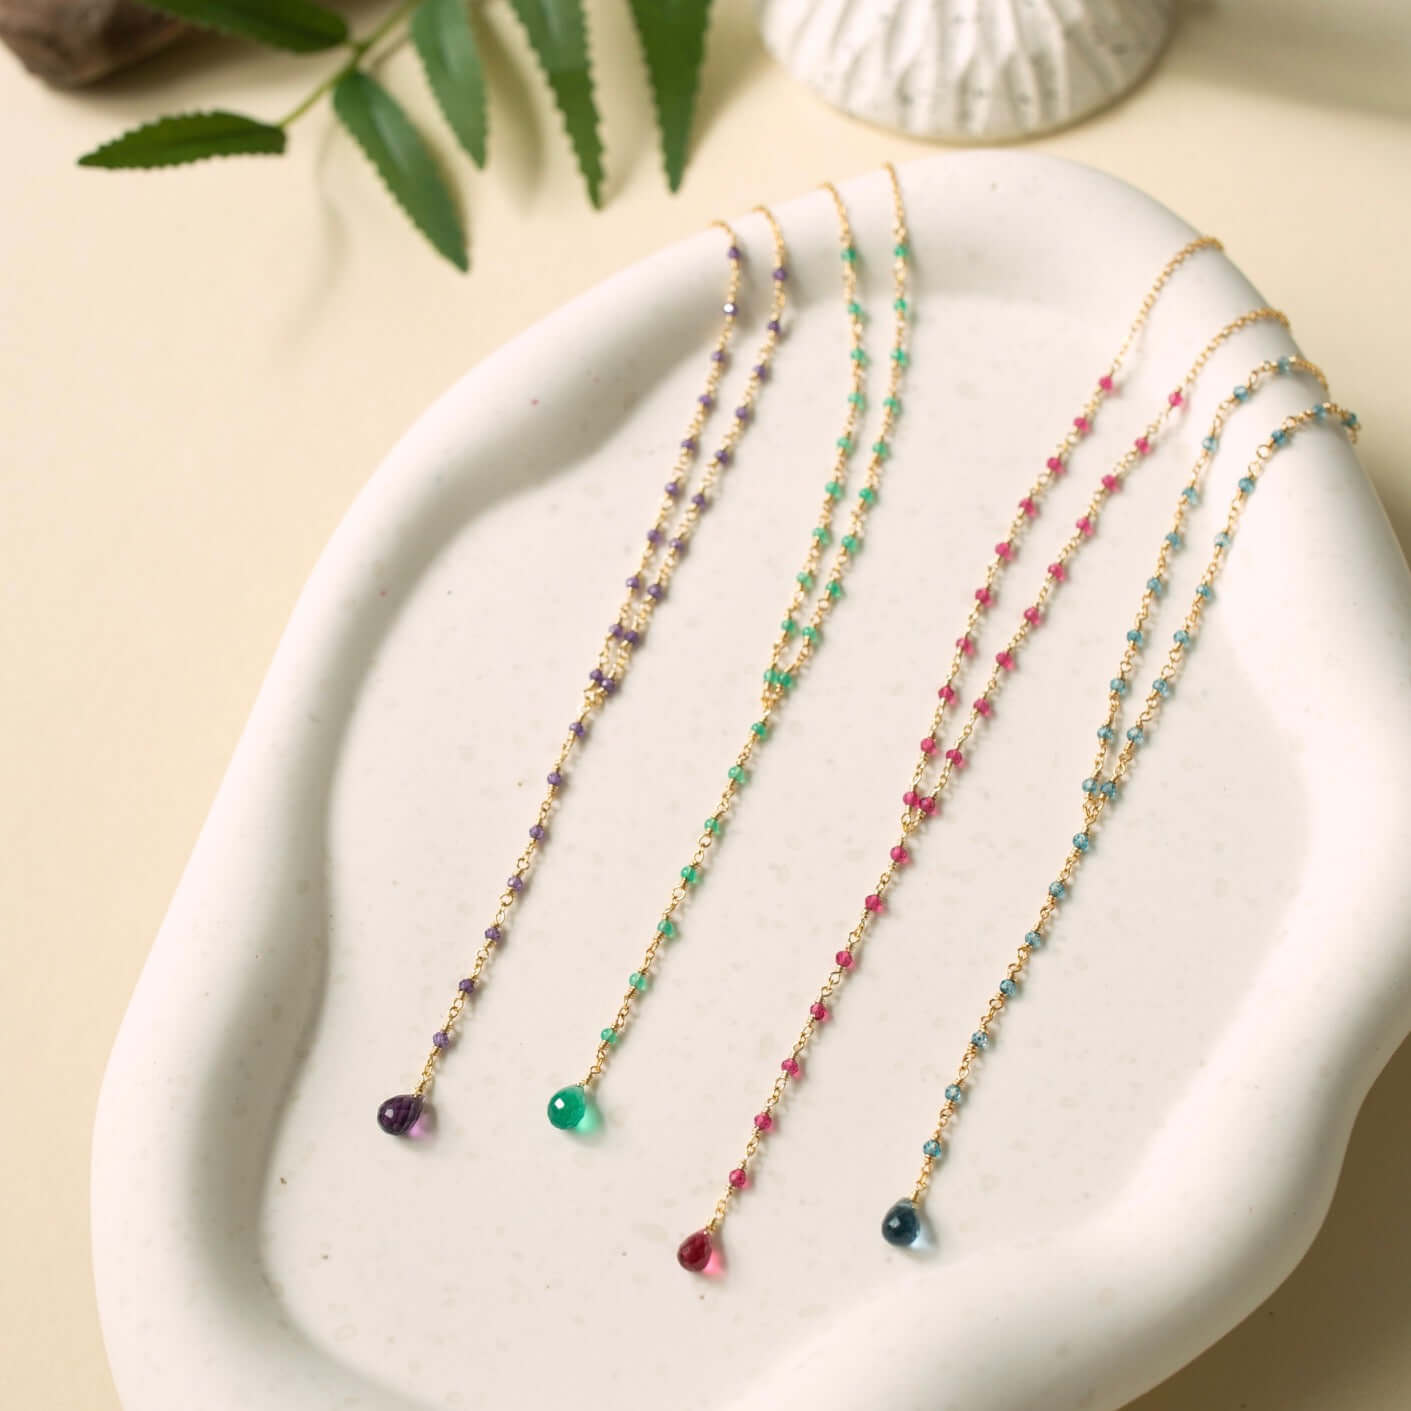 Lolite, amethyst, pink tourmaline quartz, and green onyx necklaces, casually set on clay plates, create a scene of effortless charm and natural beauty.